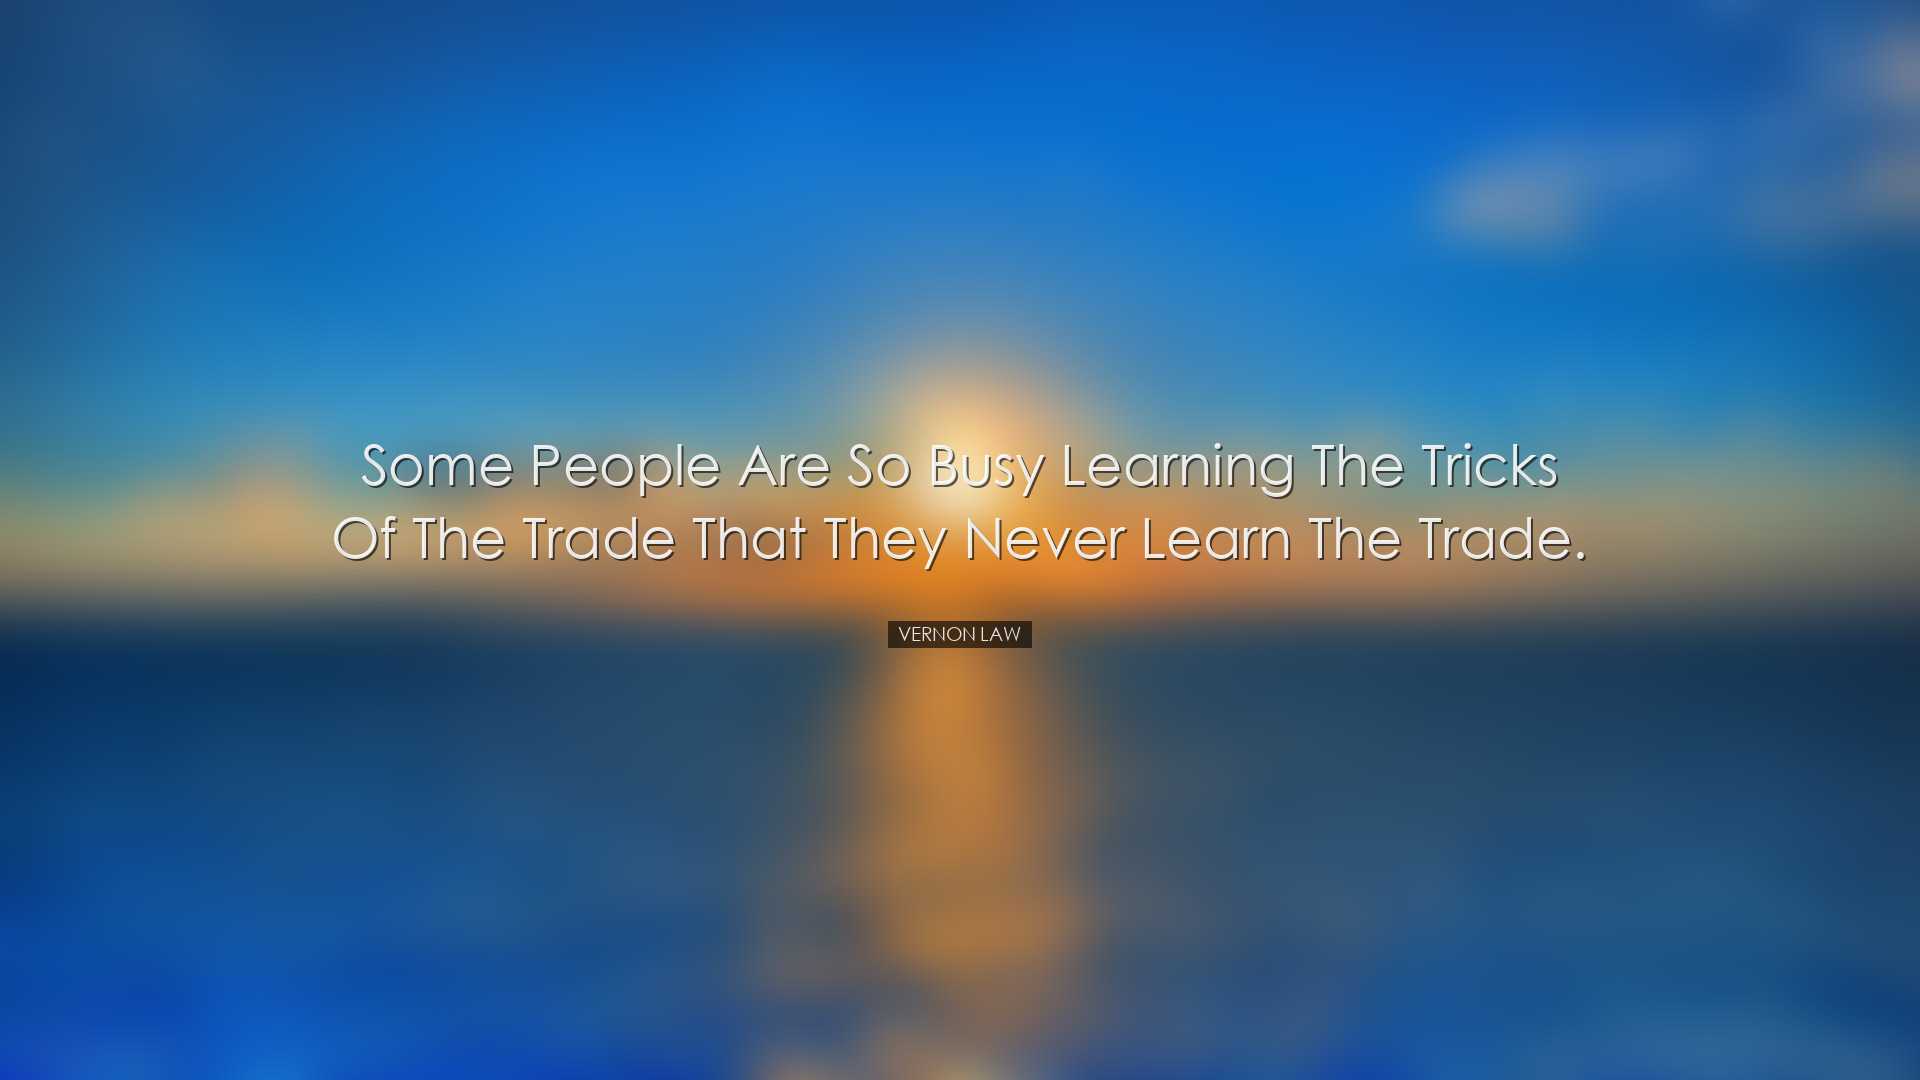 Some people are so busy learning the tricks of the trade that they